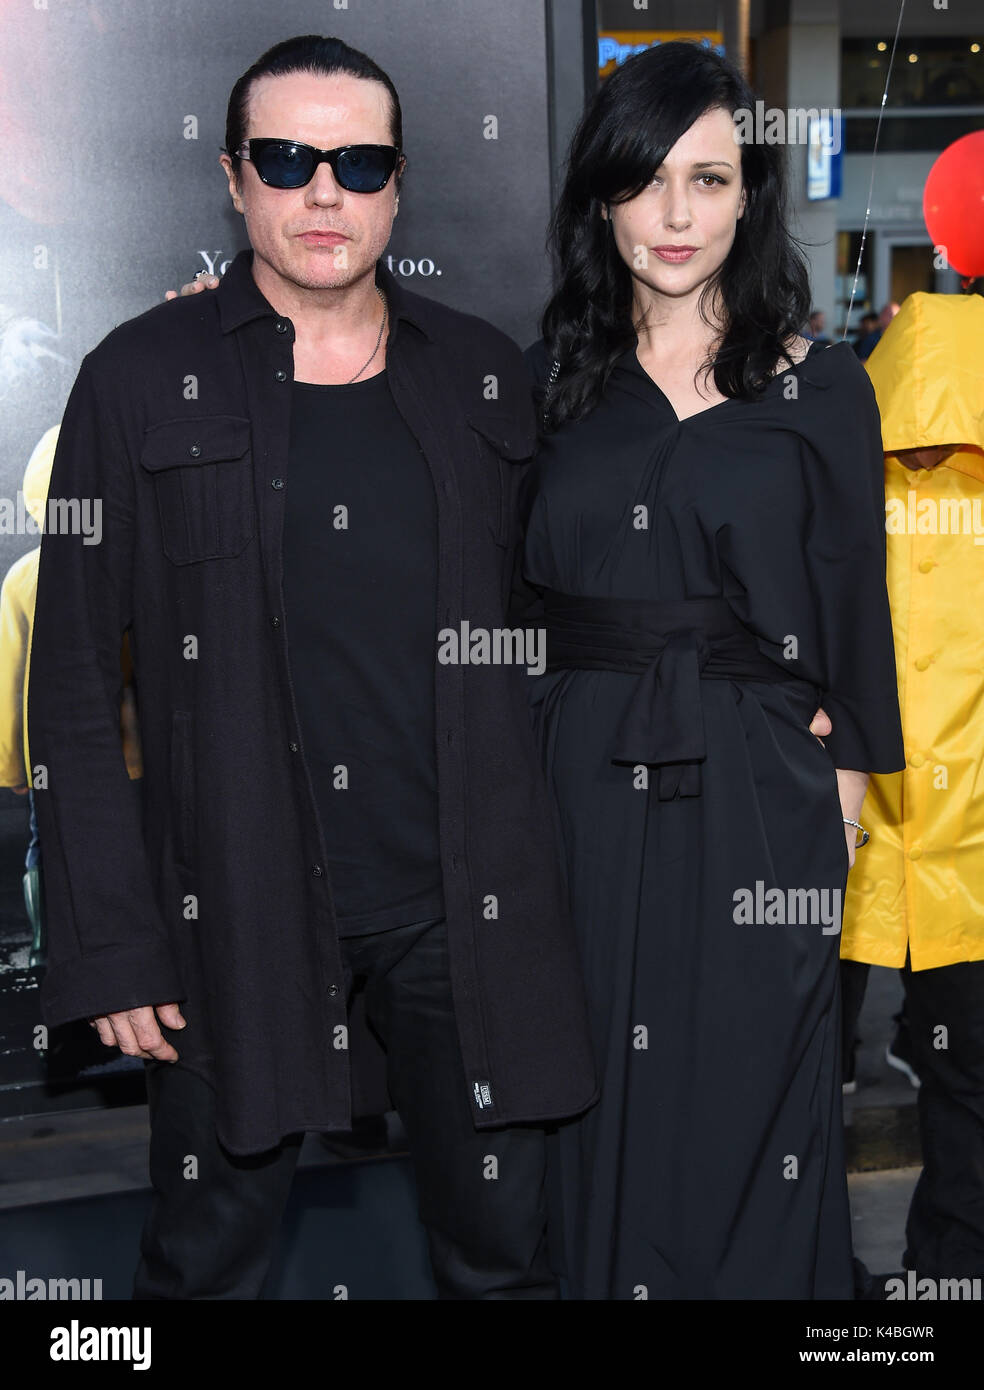 Hollywood, California, USA. 5th Sep, 2017. Ian Astbury and Aimee Nash arrives for the premiere of the film 'IT' at the Chinese theater. Credit: Lisa O'Connor/ZUMA Wire/Alamy Live News Stock Photo